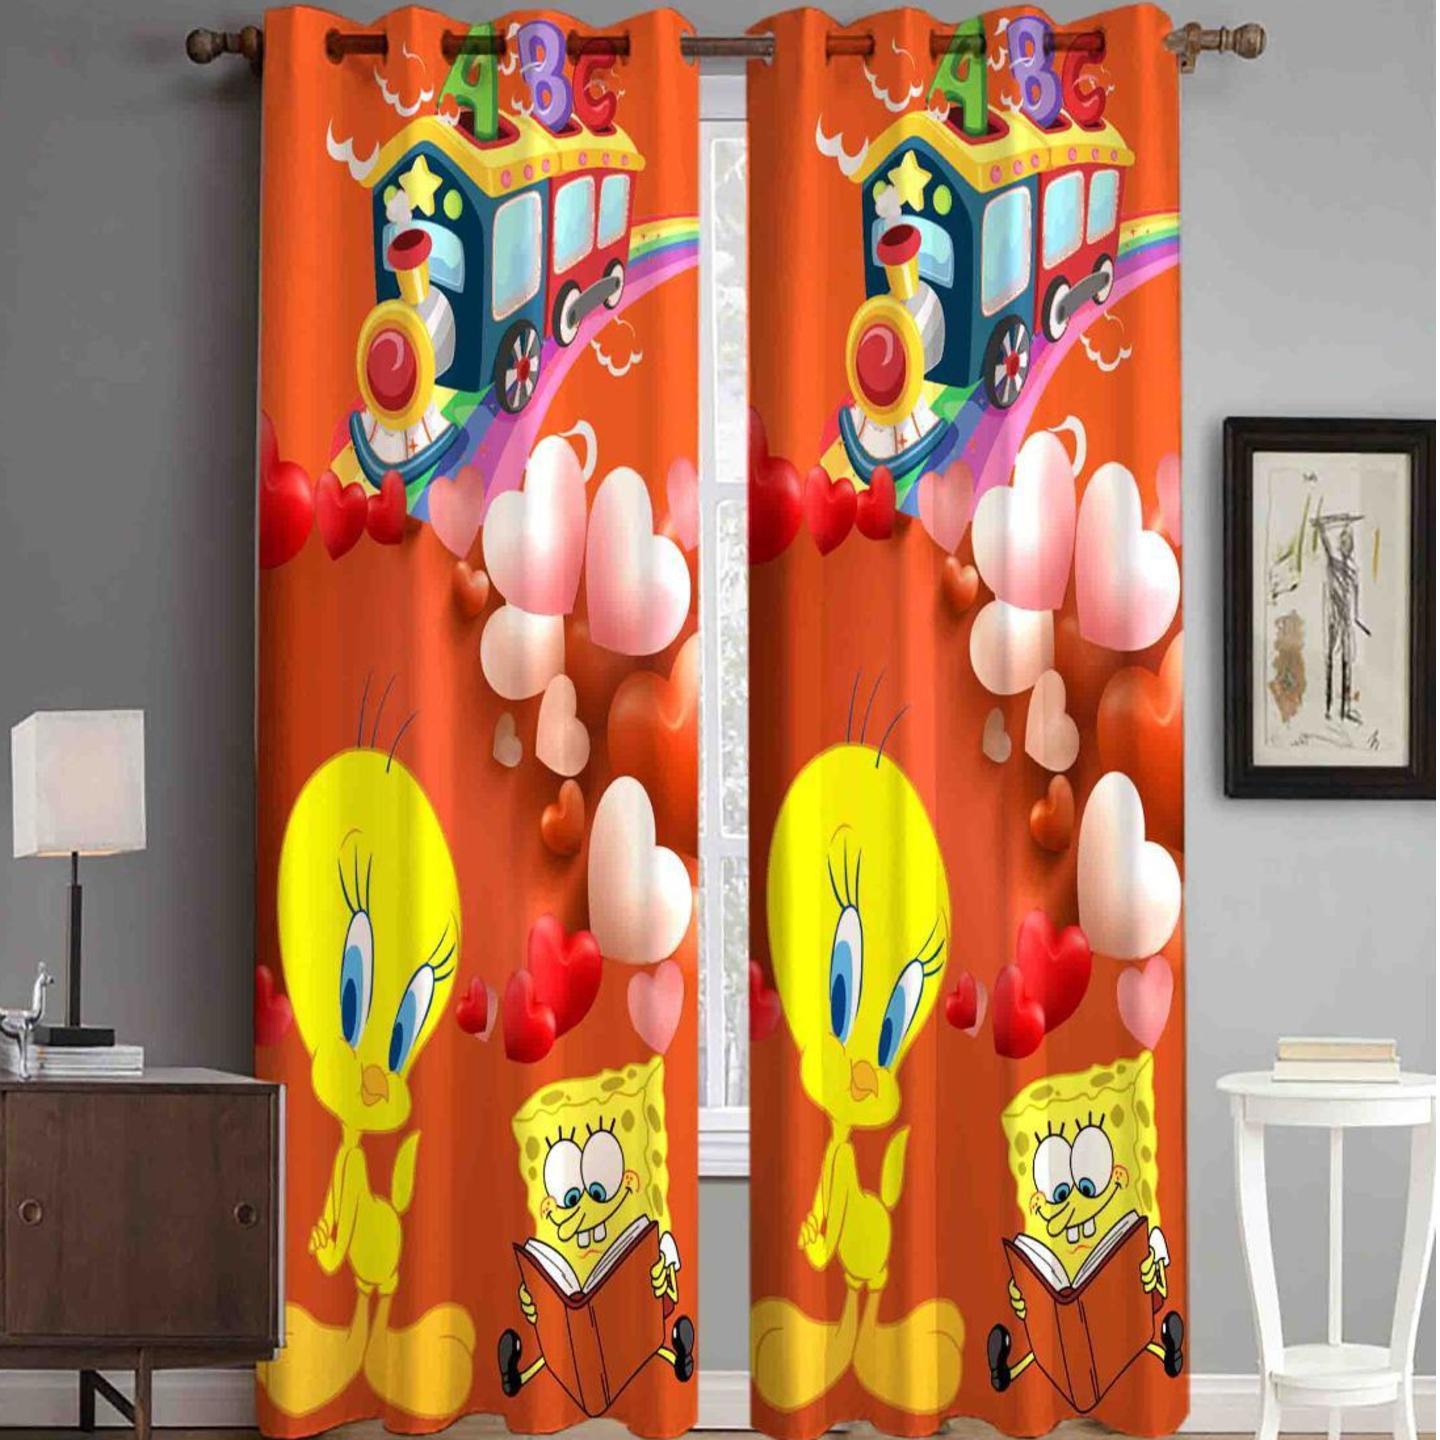 Handtex Home  Heavy Fabric Digital Printed Curtain for Kids Room Decorative, curtain for  Living Room Bedroom Home Office Decor Set of 2 (4x7)